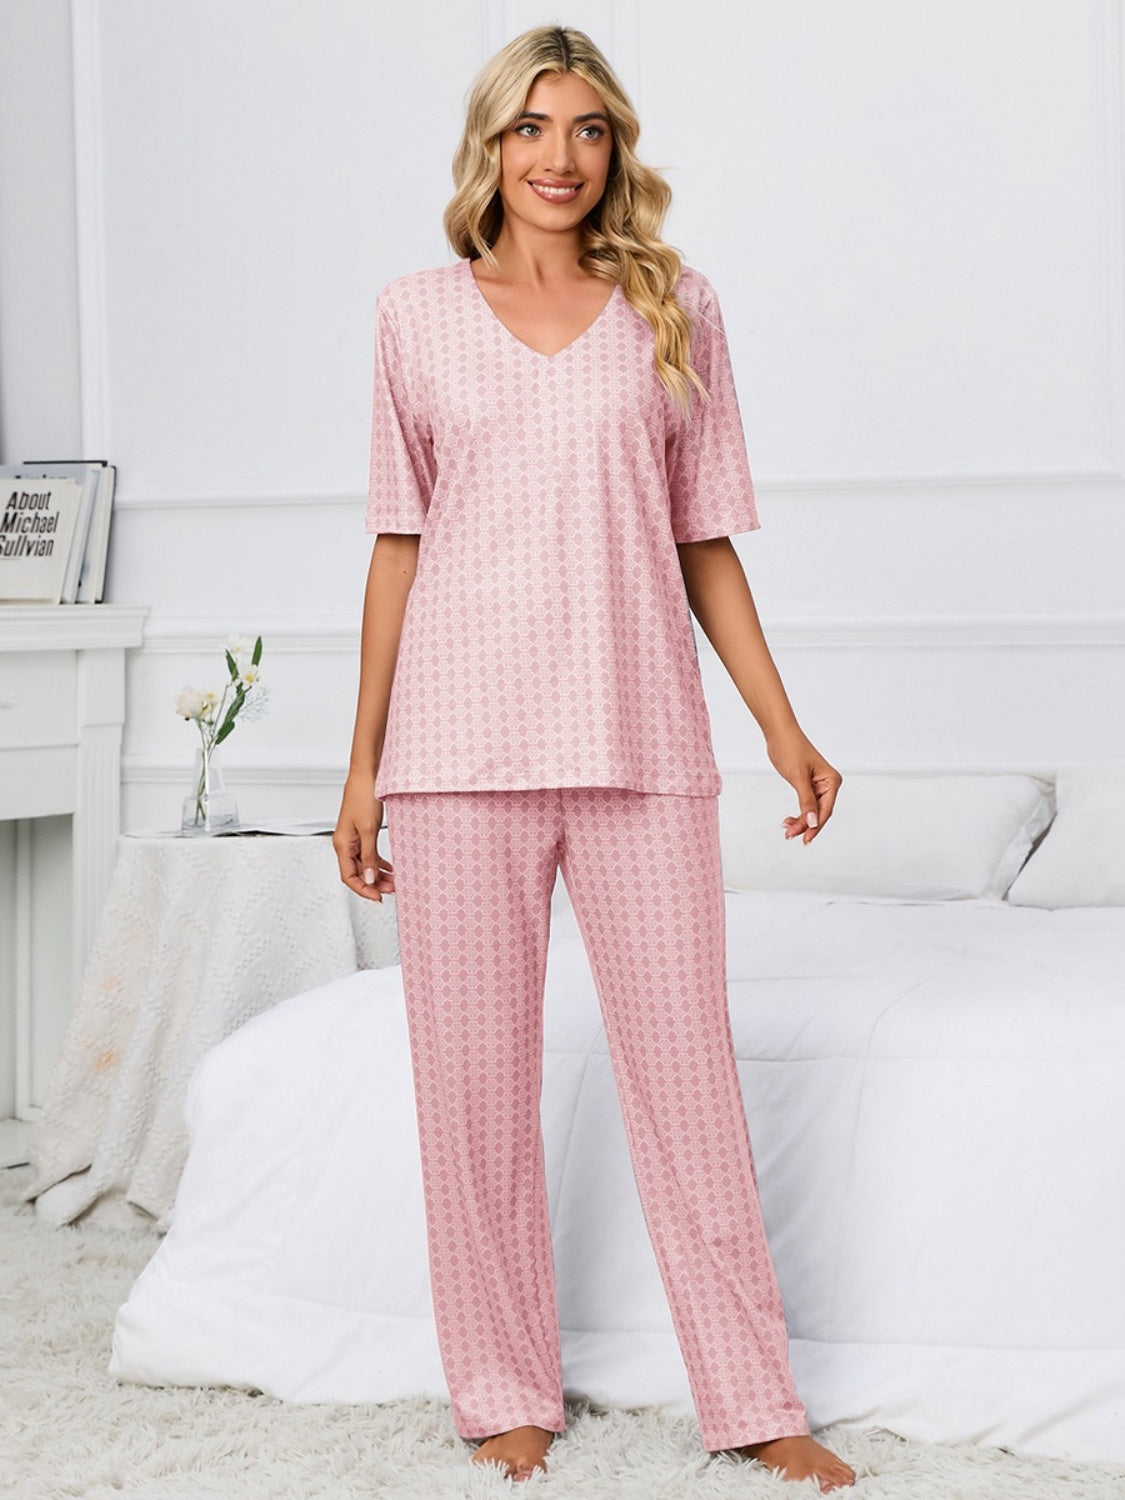 Indulge in luxury with our V-Neck Lounge Set. Available in blue & pink, perfect for stylish comfort at home. Shop now for cozy elegance!